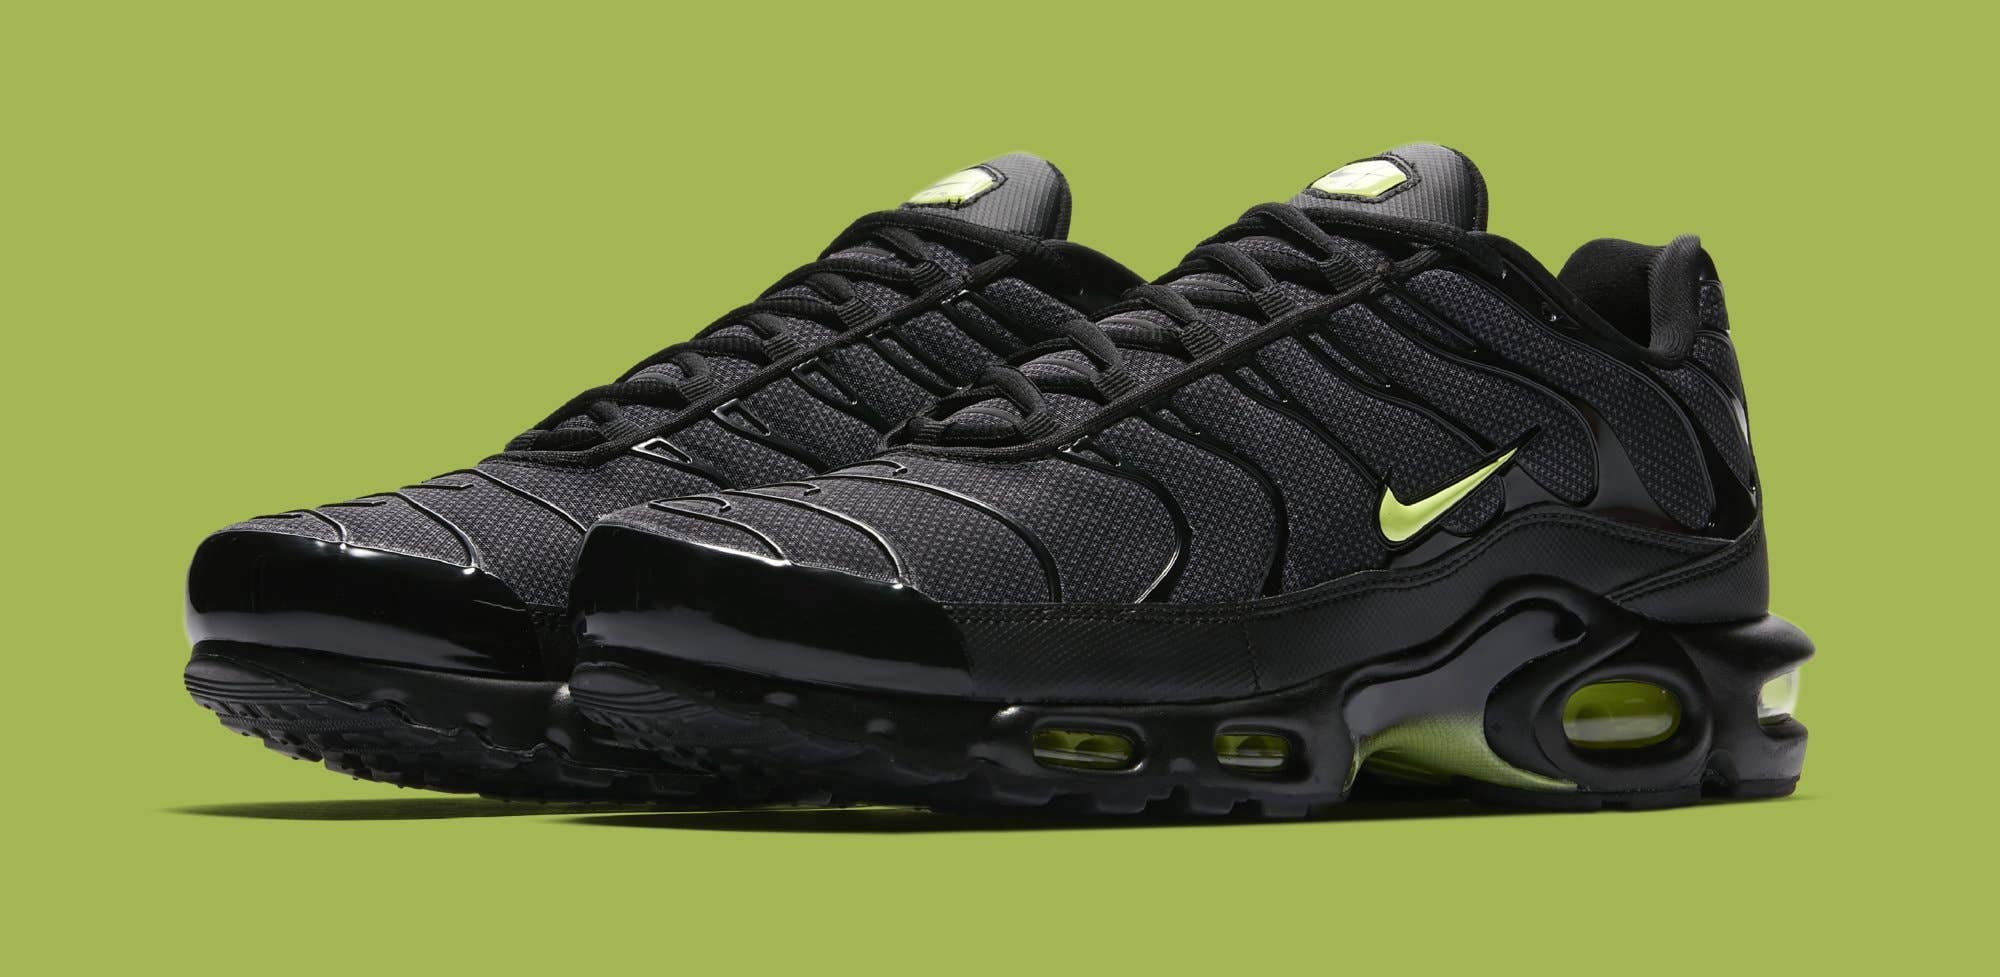 More Nike Air Max Plus Colorways Coming Soon | Complex